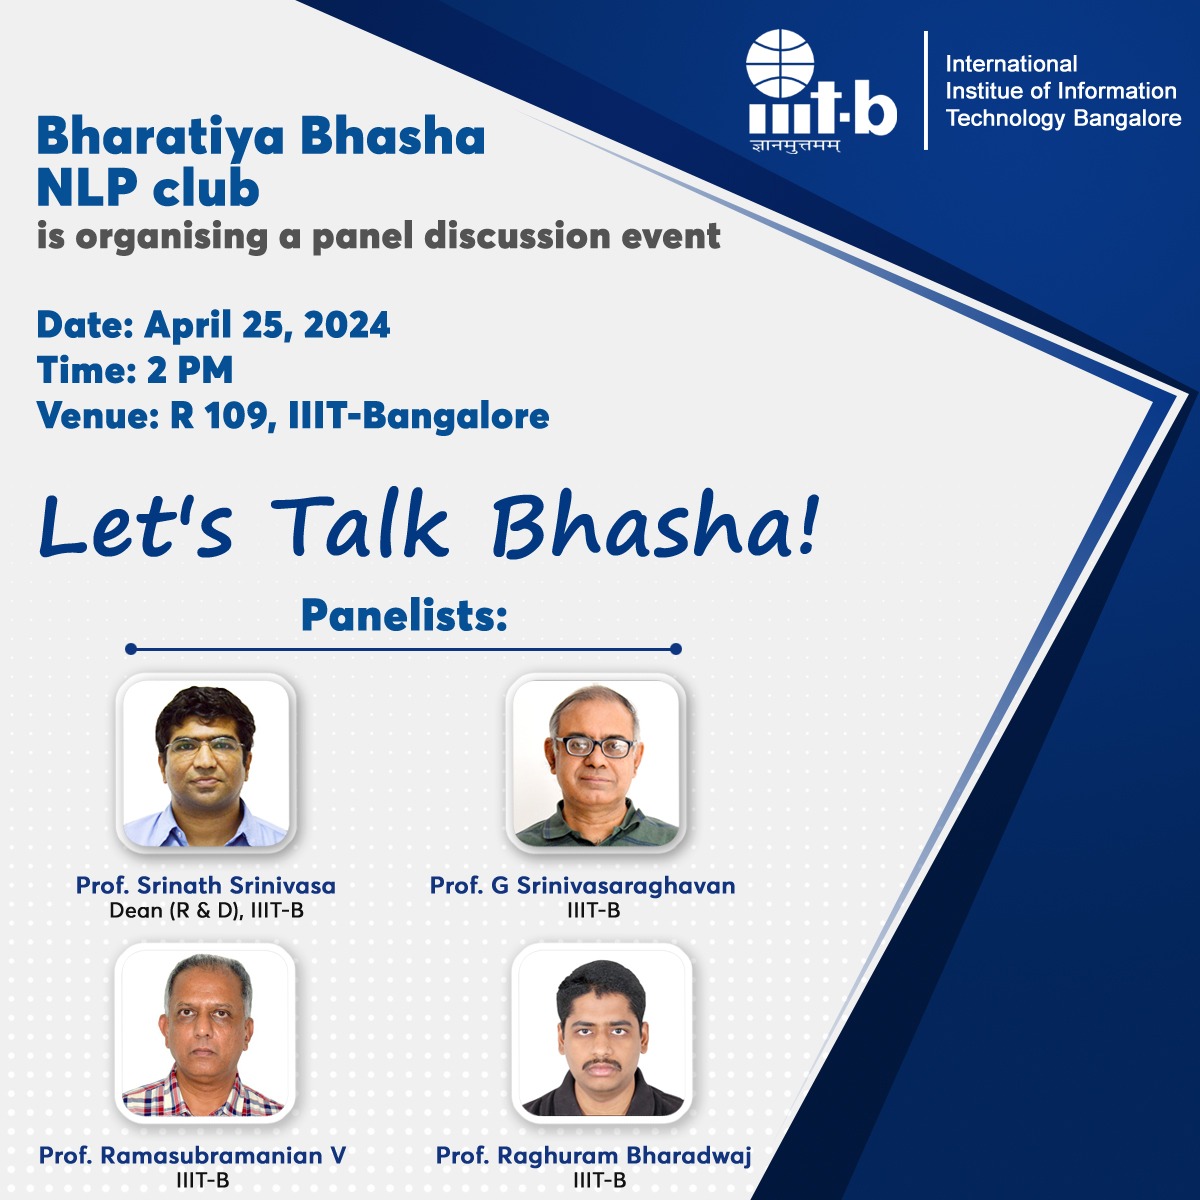 The Bharatiya Bhasha NLP Club is organising a panel discussion titled “Let’s Talk Bhasha” on April 25 at 2 PM at IIIT-Bangalore. You can also join the discussion online through Zoom: us06web.zoom.us/j/85860277374?… Meeting ID: 858 6027 7374 Passcode: 152151 #IIITB #IIITBangalore